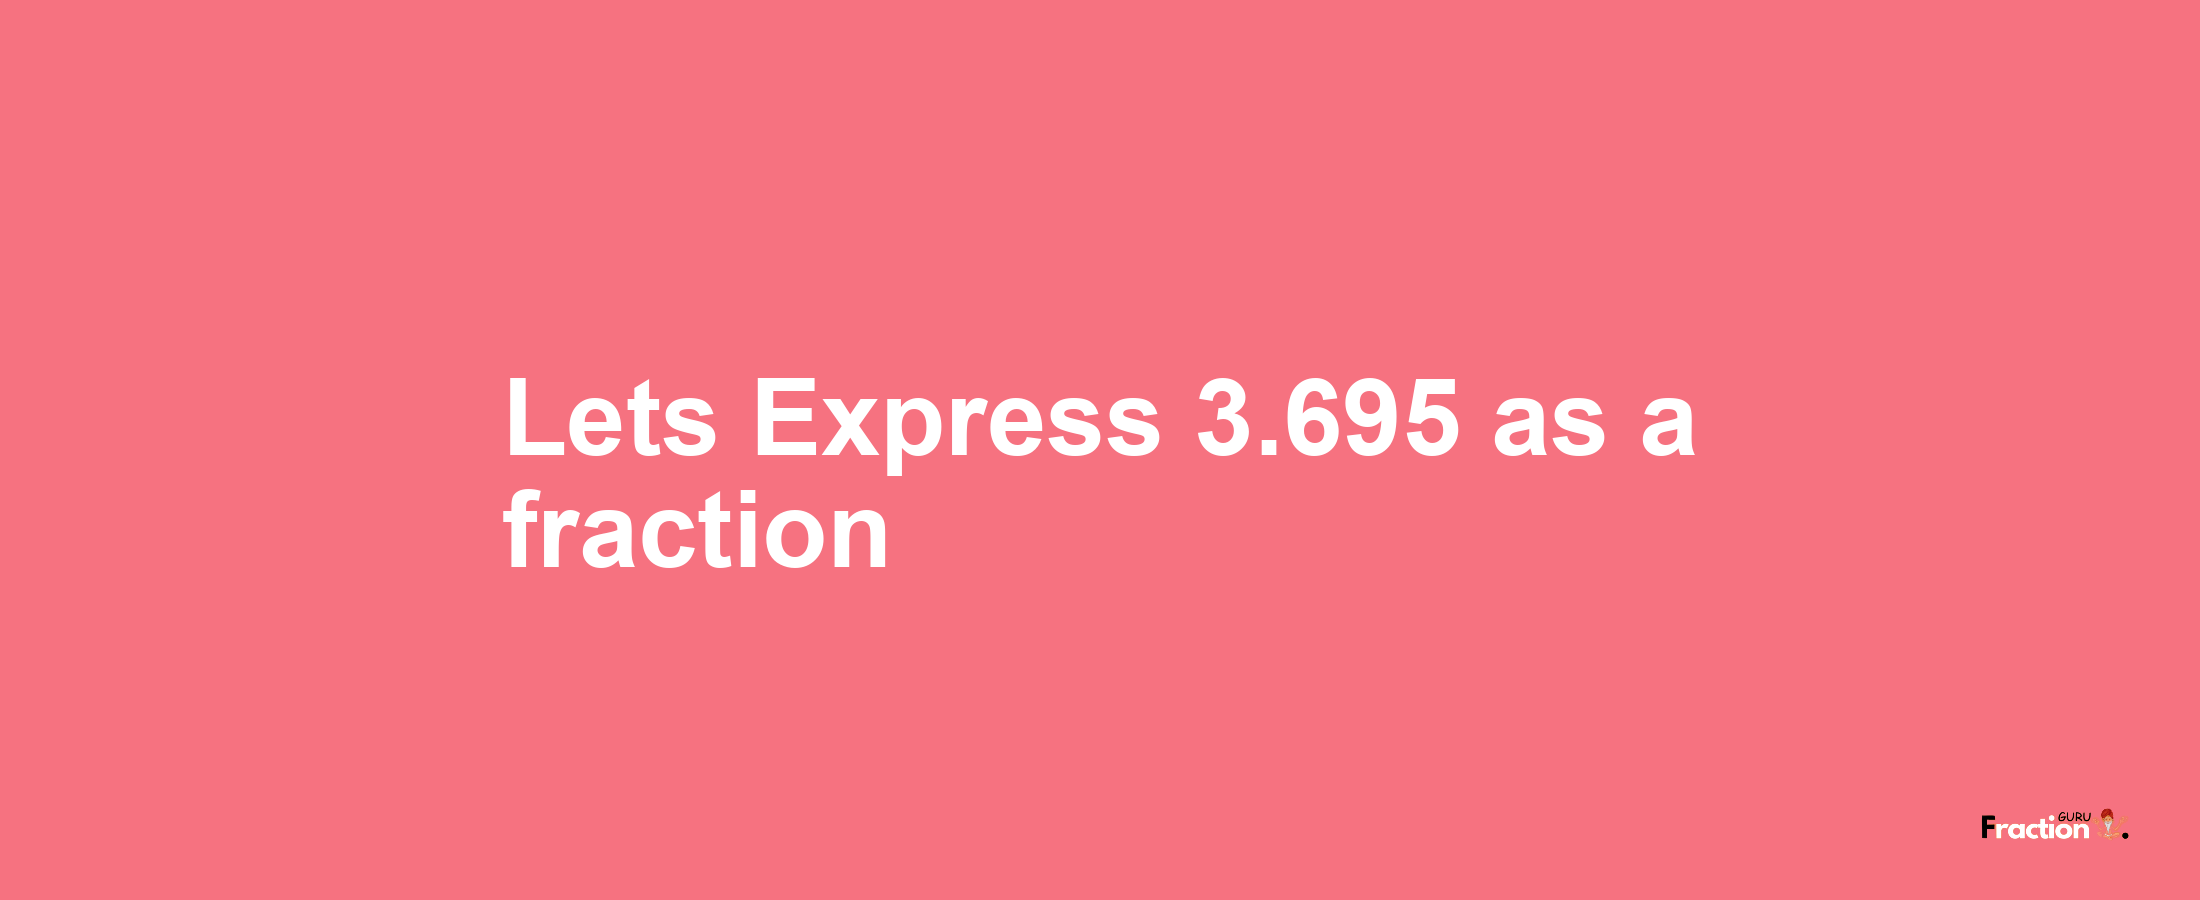 Lets Express 3.695 as afraction